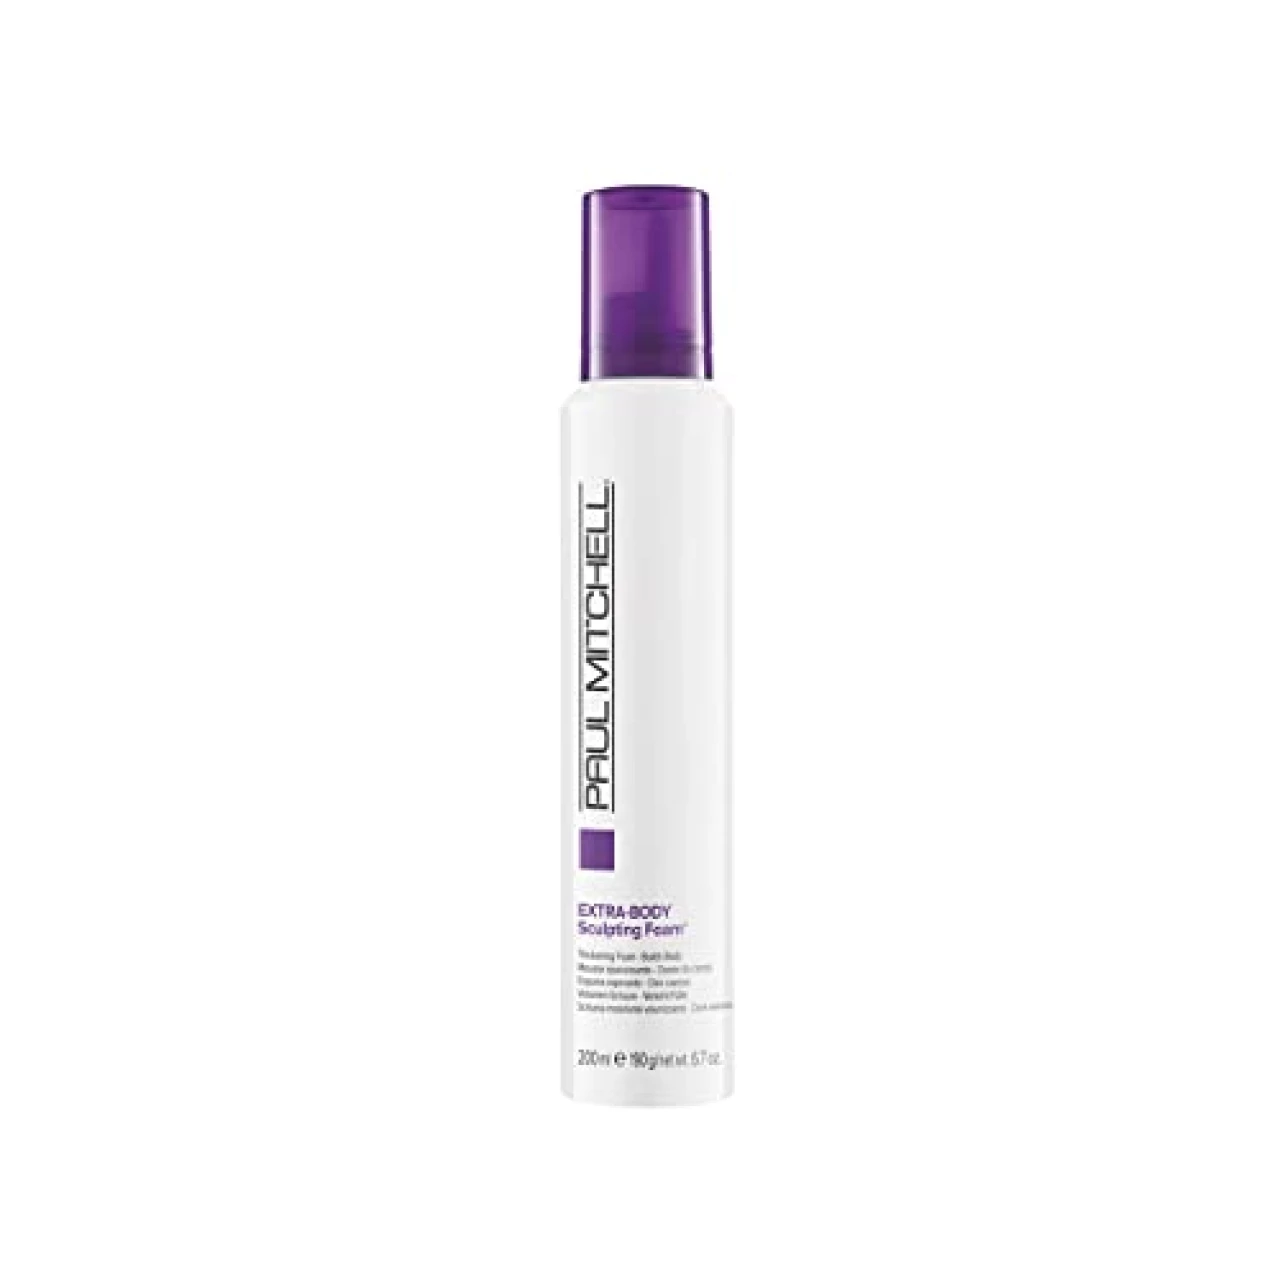 Paul Mitchell Extra-Body Sculpting Foam, Thickens + Builds Body, For Fine Hair